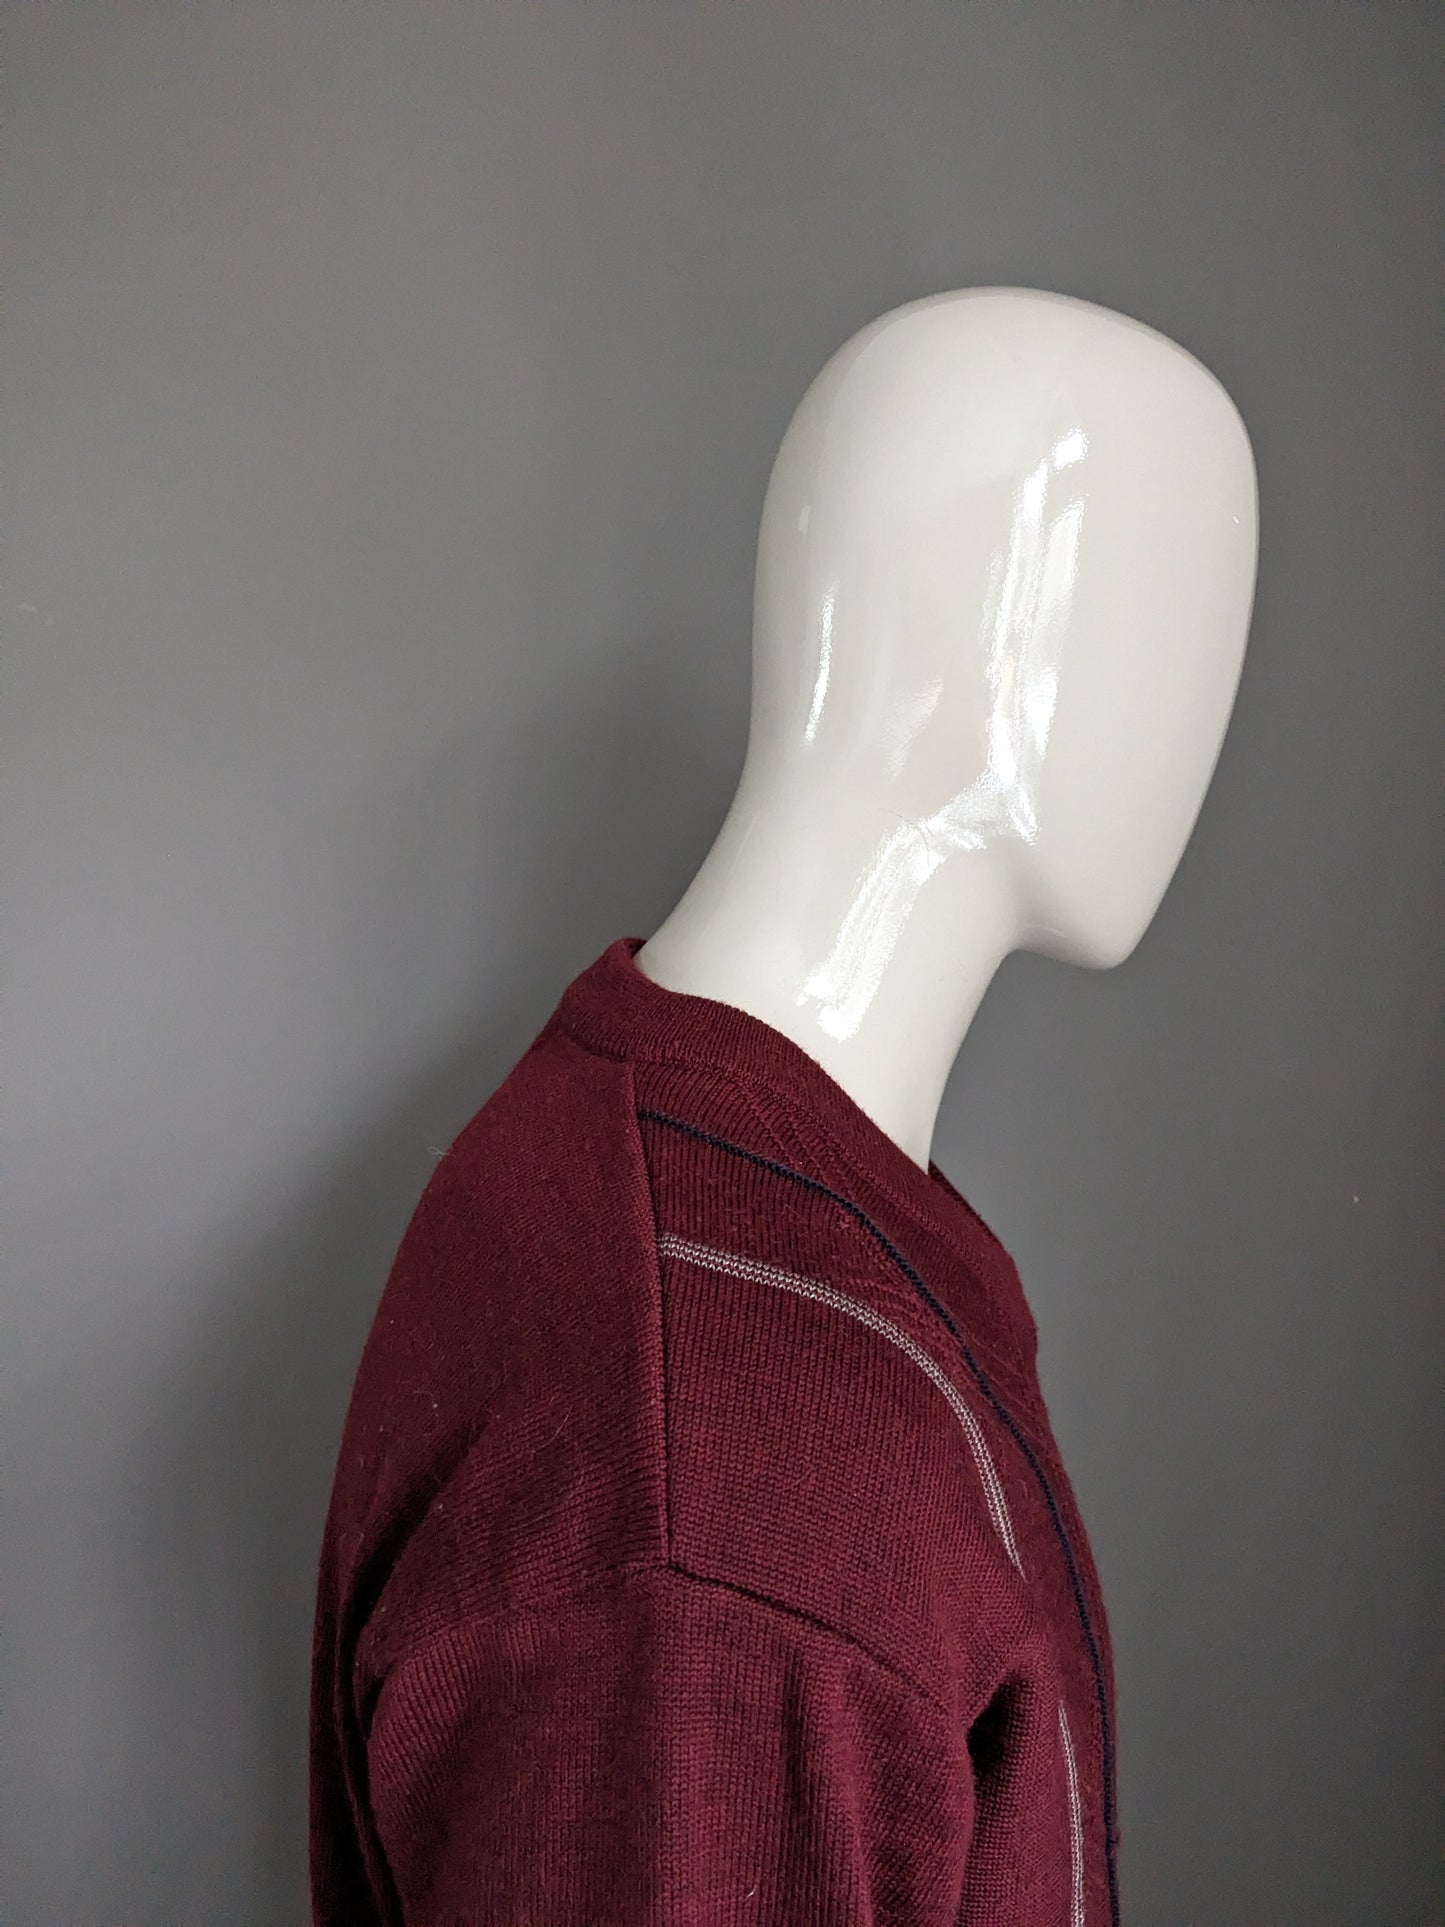 Vintage Carlo premera wool sweater with v-neck. Bordeaux. Size L.